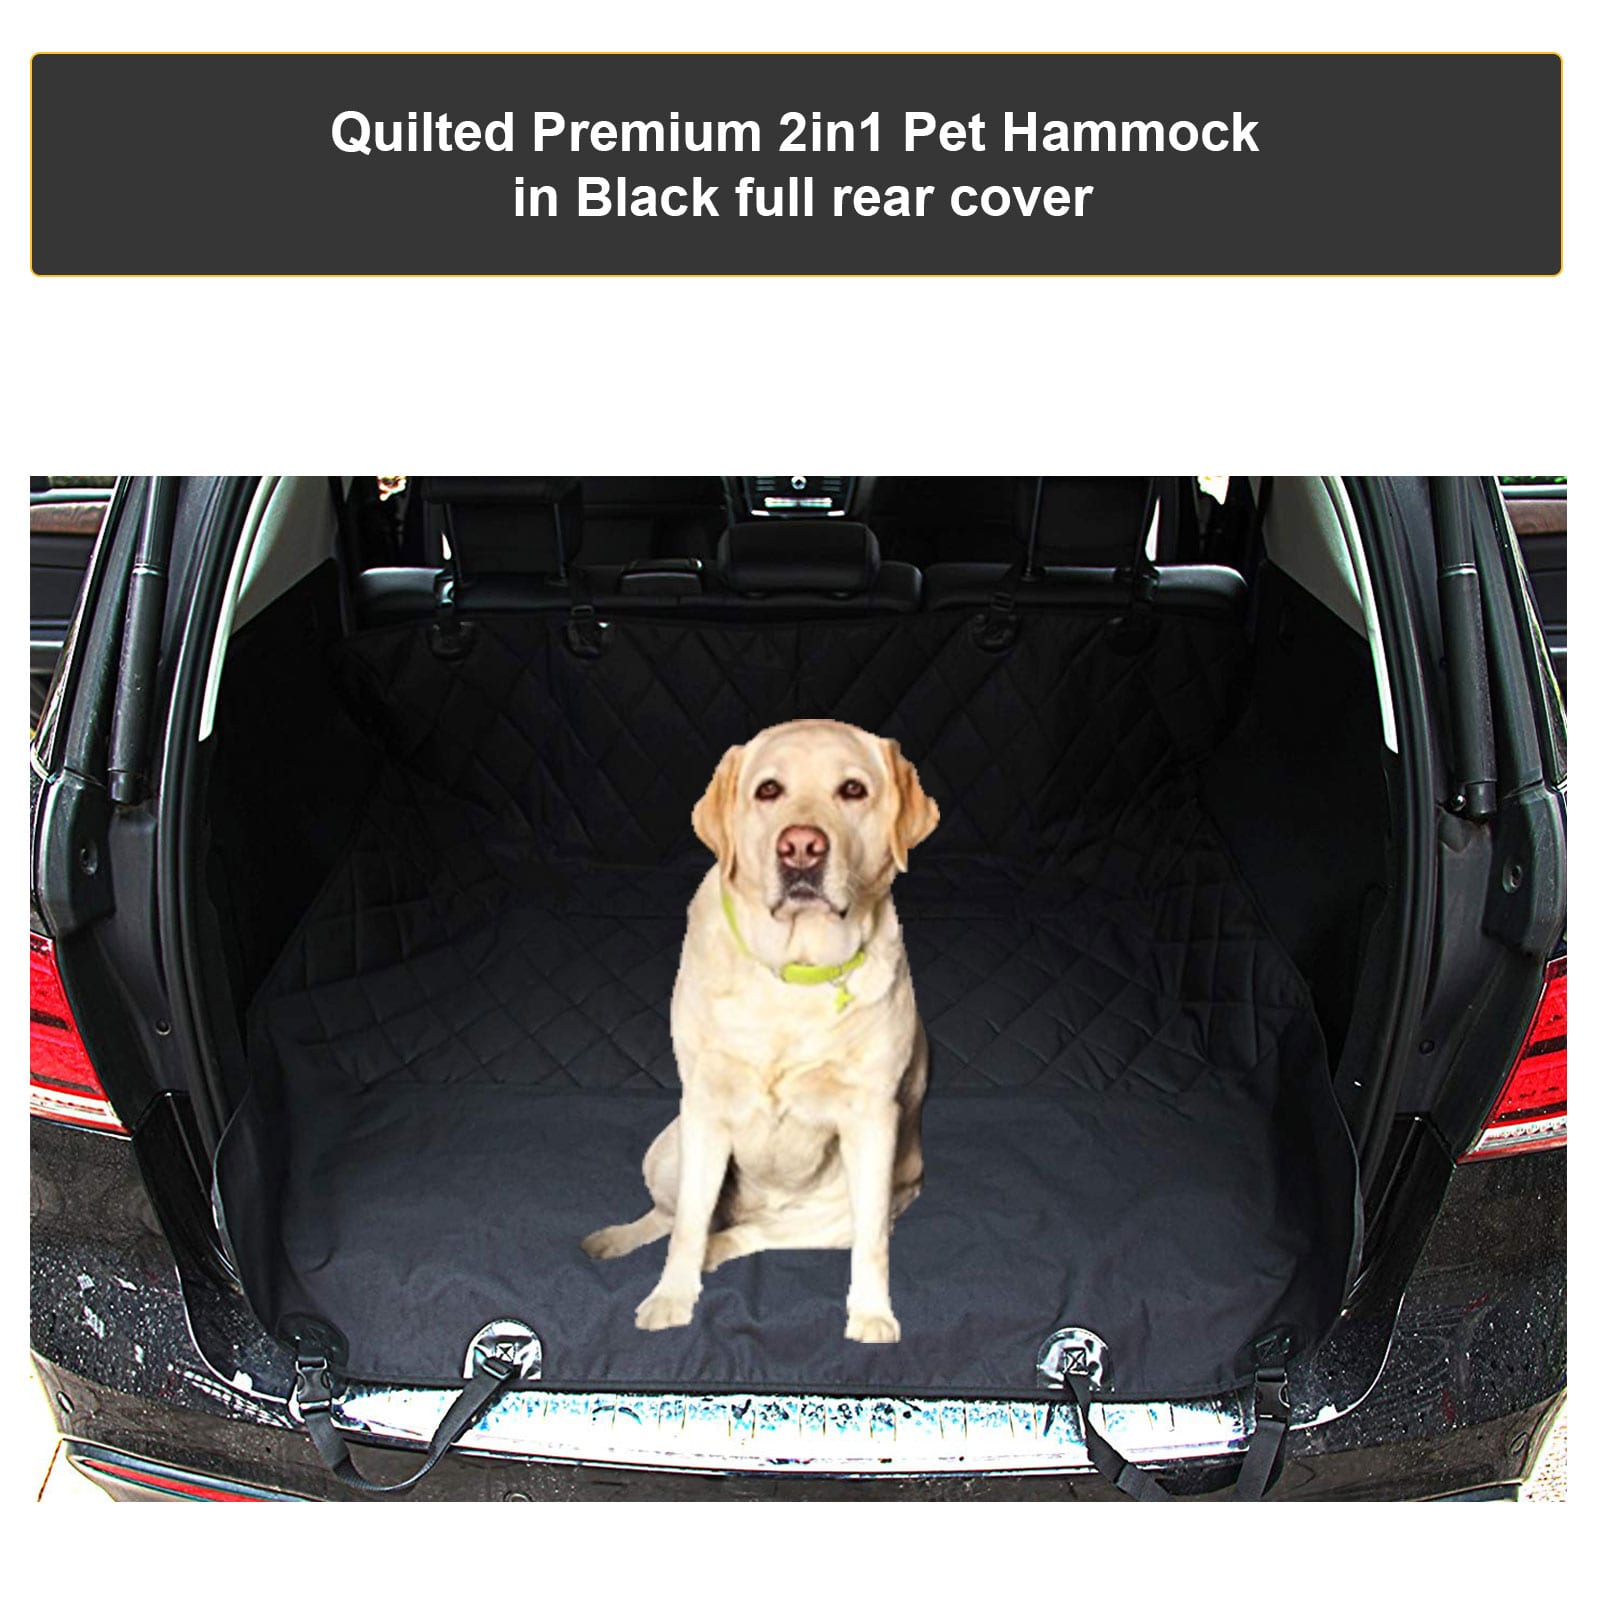 Heavy Duty Black Strong Quilted Pet Dog Cat Hammock Rear Seat Cover Protector 2008-2013 FOR BMW 1 Series Convertible E88 